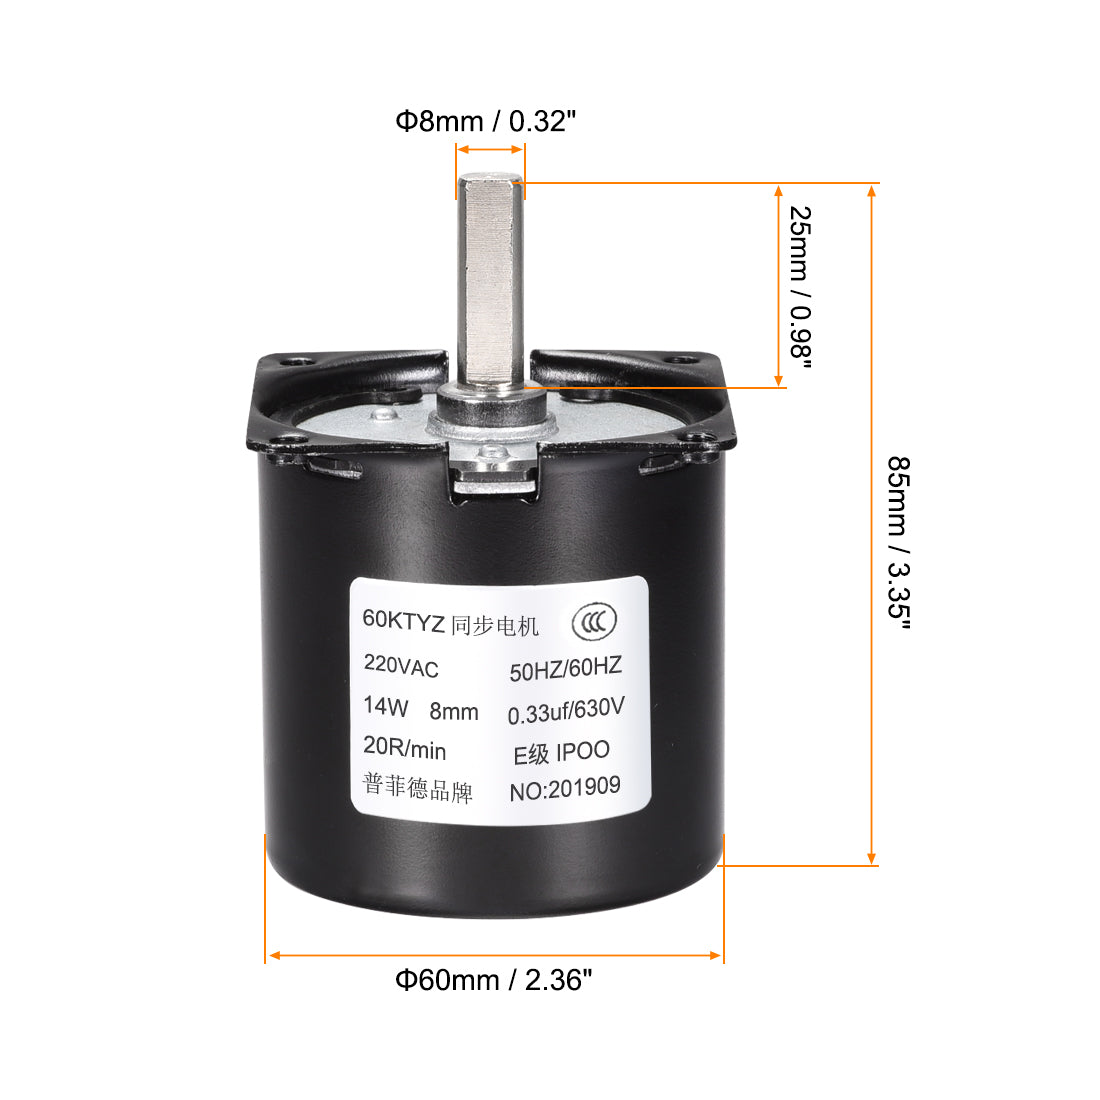 uxcell Uxcell AC 220V Electric Synchronous Motor Metal Gear Turntable /C 20RPM 50-60HZ 14W 8mm Dia Eccentric Shaft